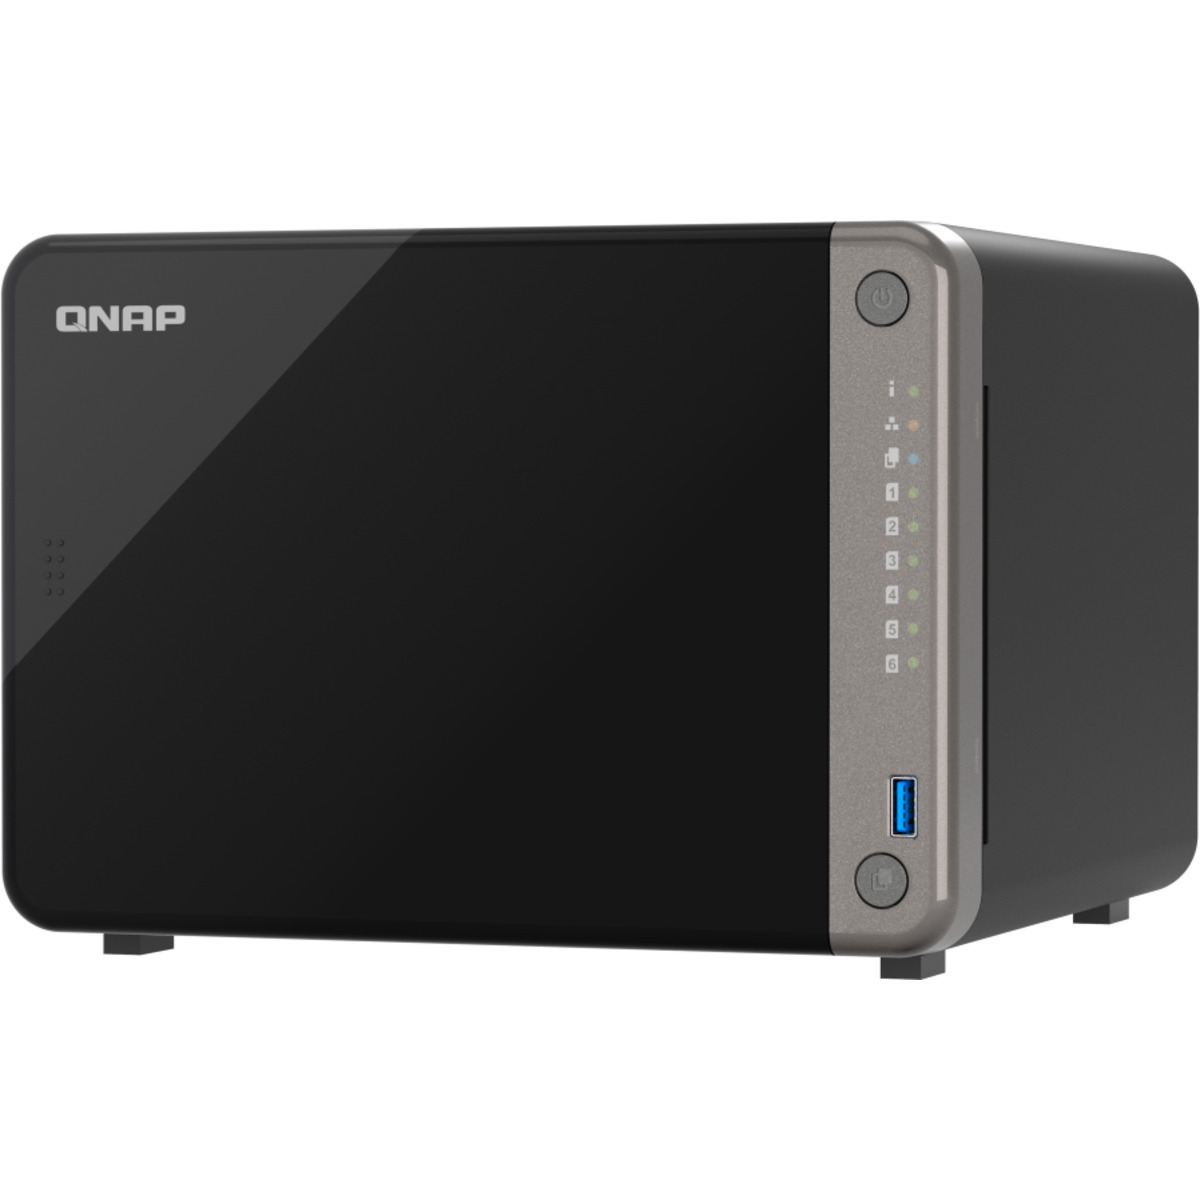 QNAP TS-AI642 Desktop 6-Bay Multimedia / Power User / Business NAS - Network Attached Storage Device Burn-In Tested Configurations TS-AI642